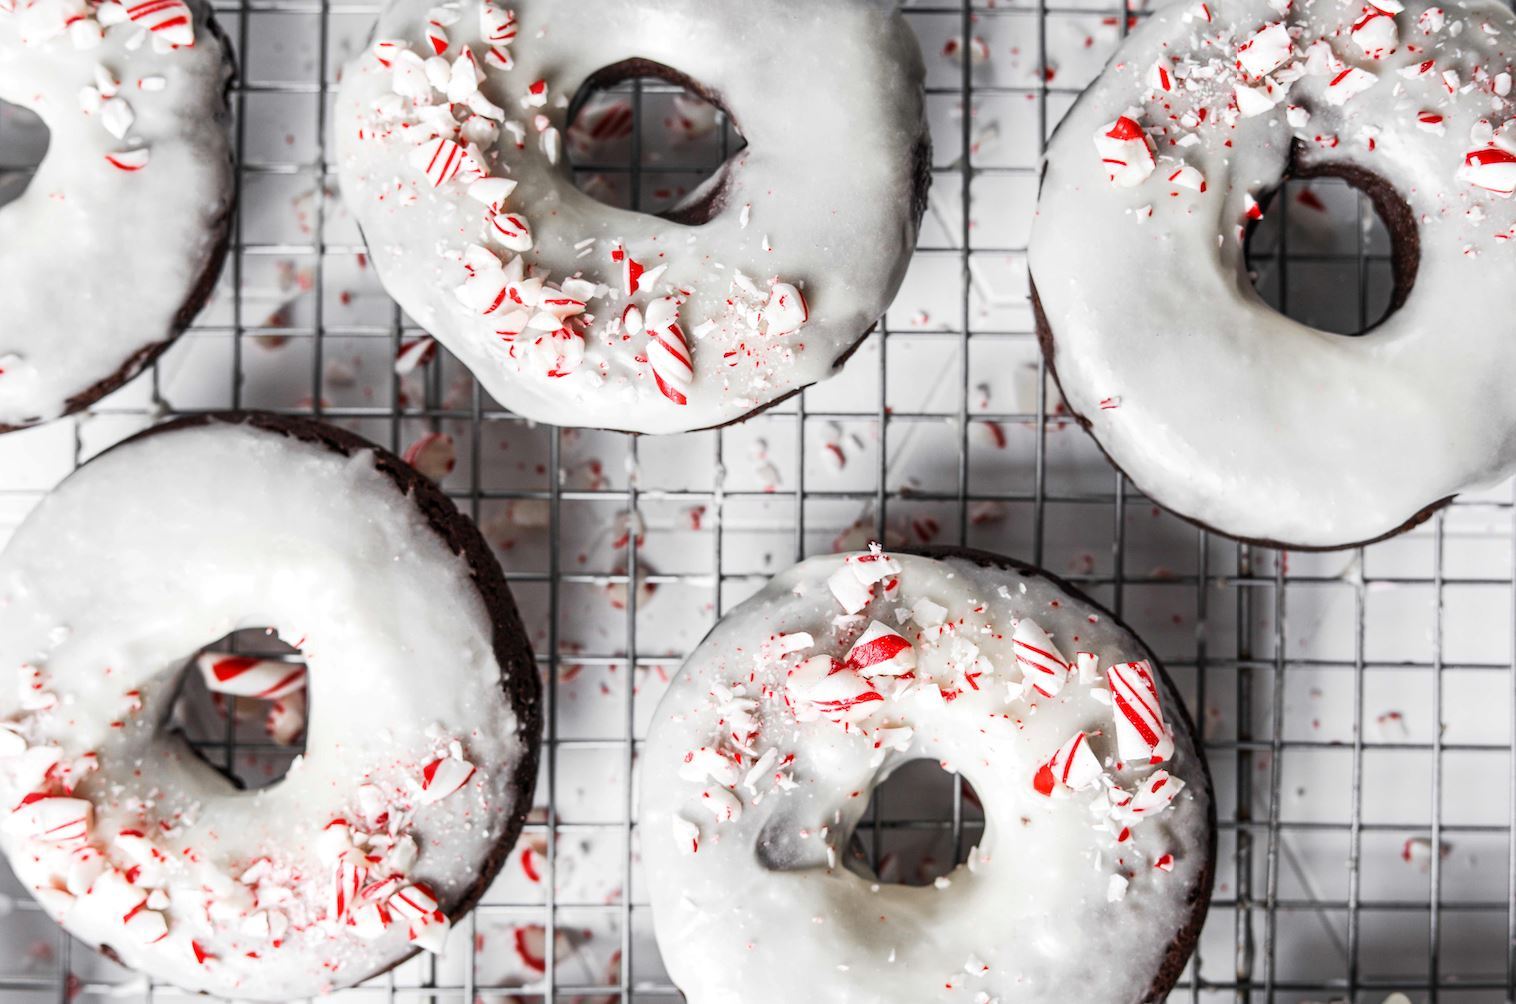 A cooling rack covered with a holiday treat: Fody's Chocolate Peppermint Glazed Donuts. These gluten-free donuts are chocolate colored, with a white glaze and a sprinkling of crushed candy cane.